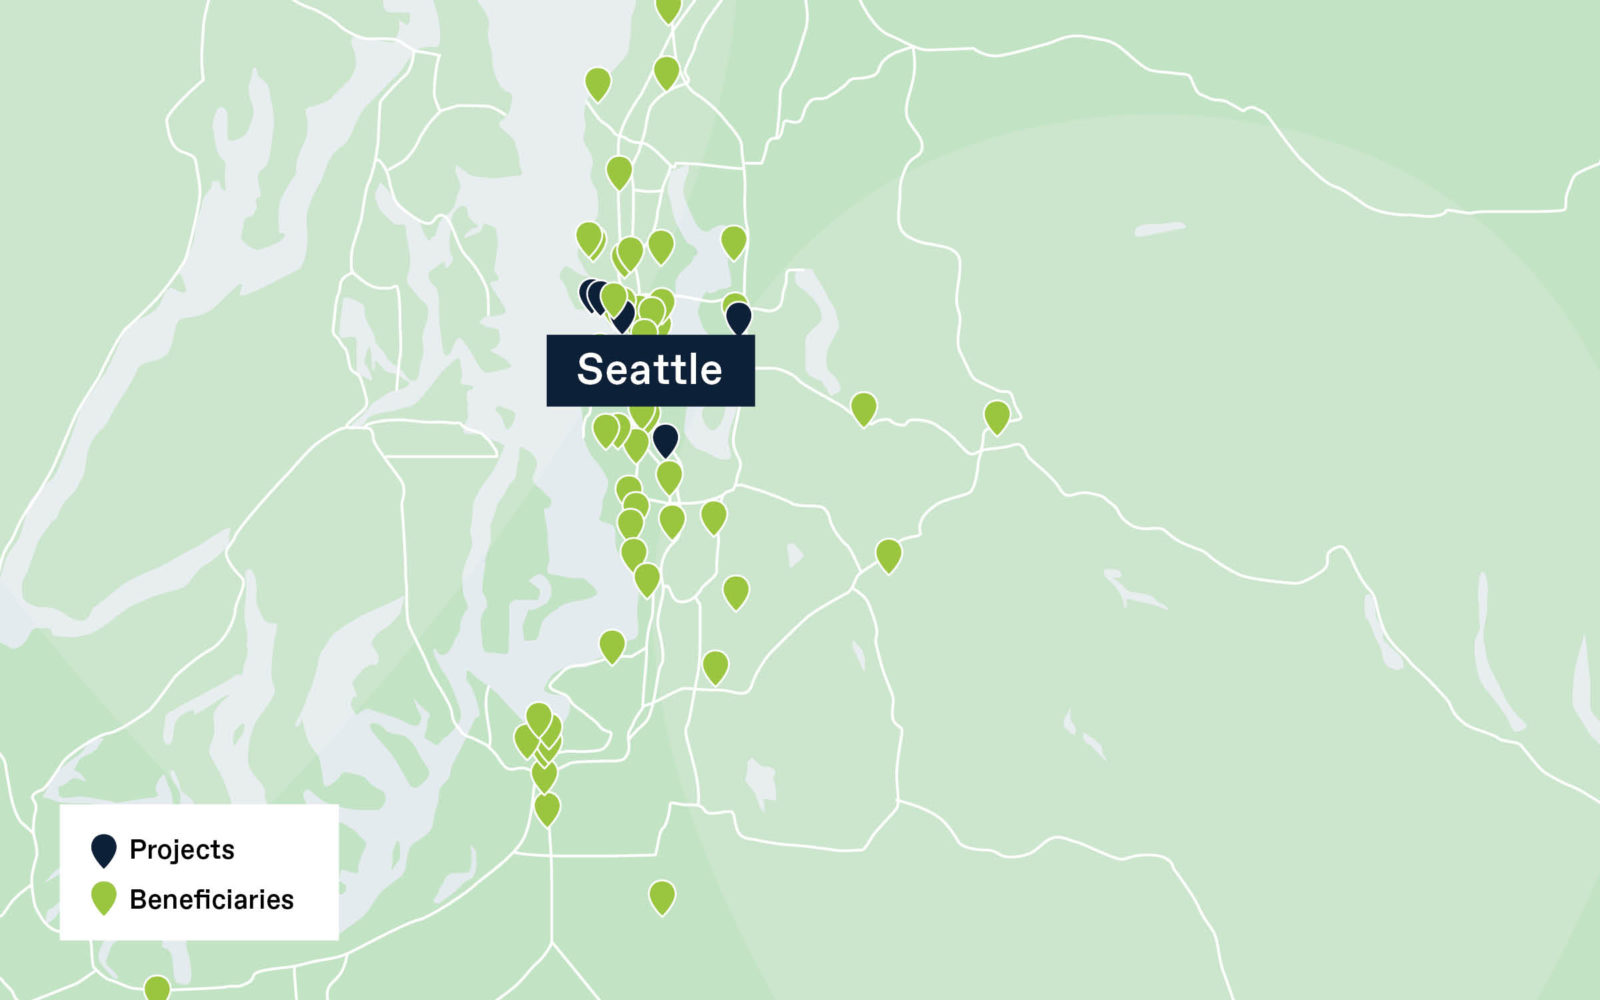 Helping Expedia Group sustainably decommission 600,000 square feet in Seattle region